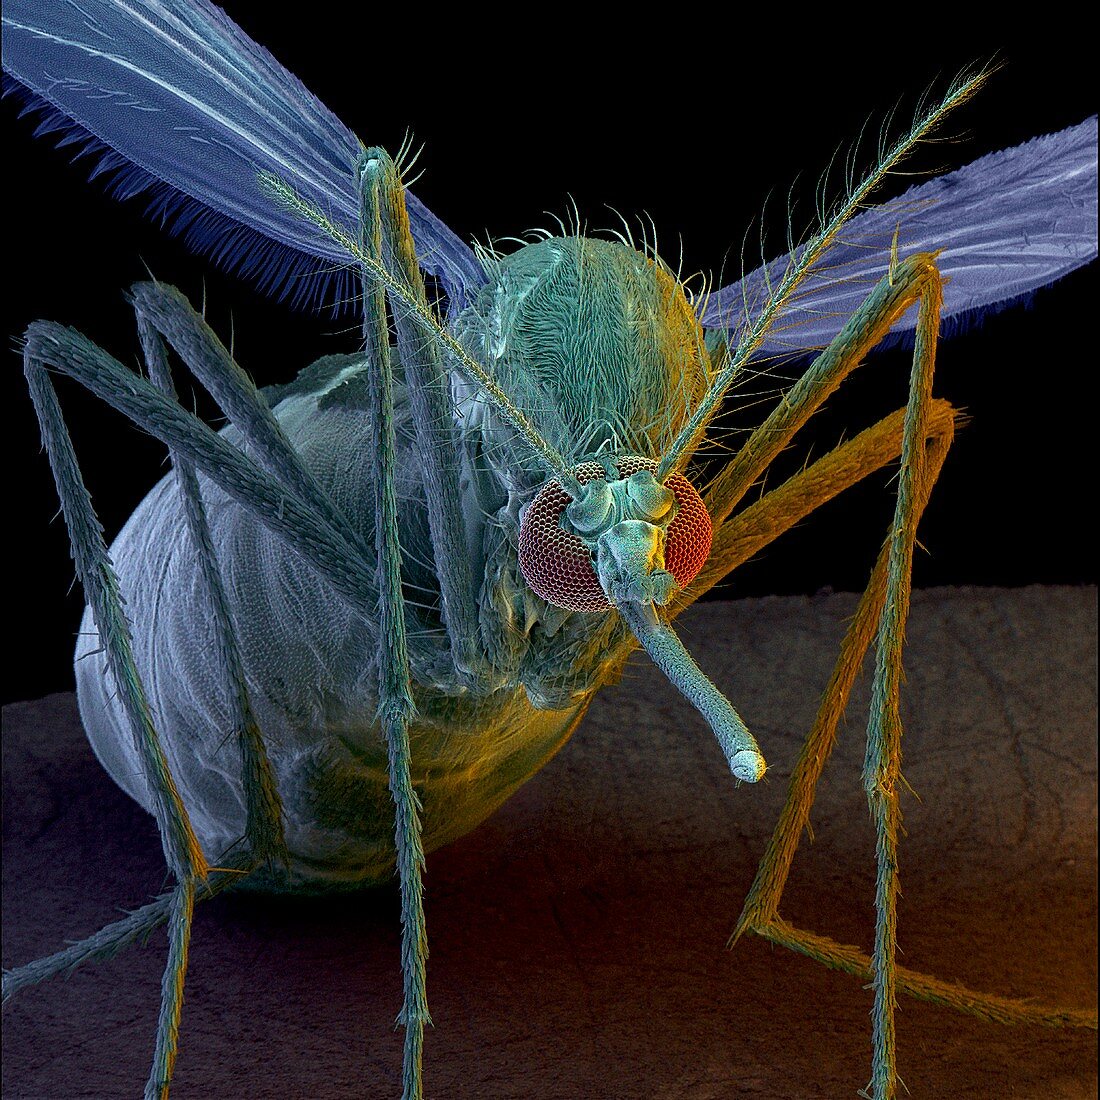 SEM of the mosquito aedes aegypti